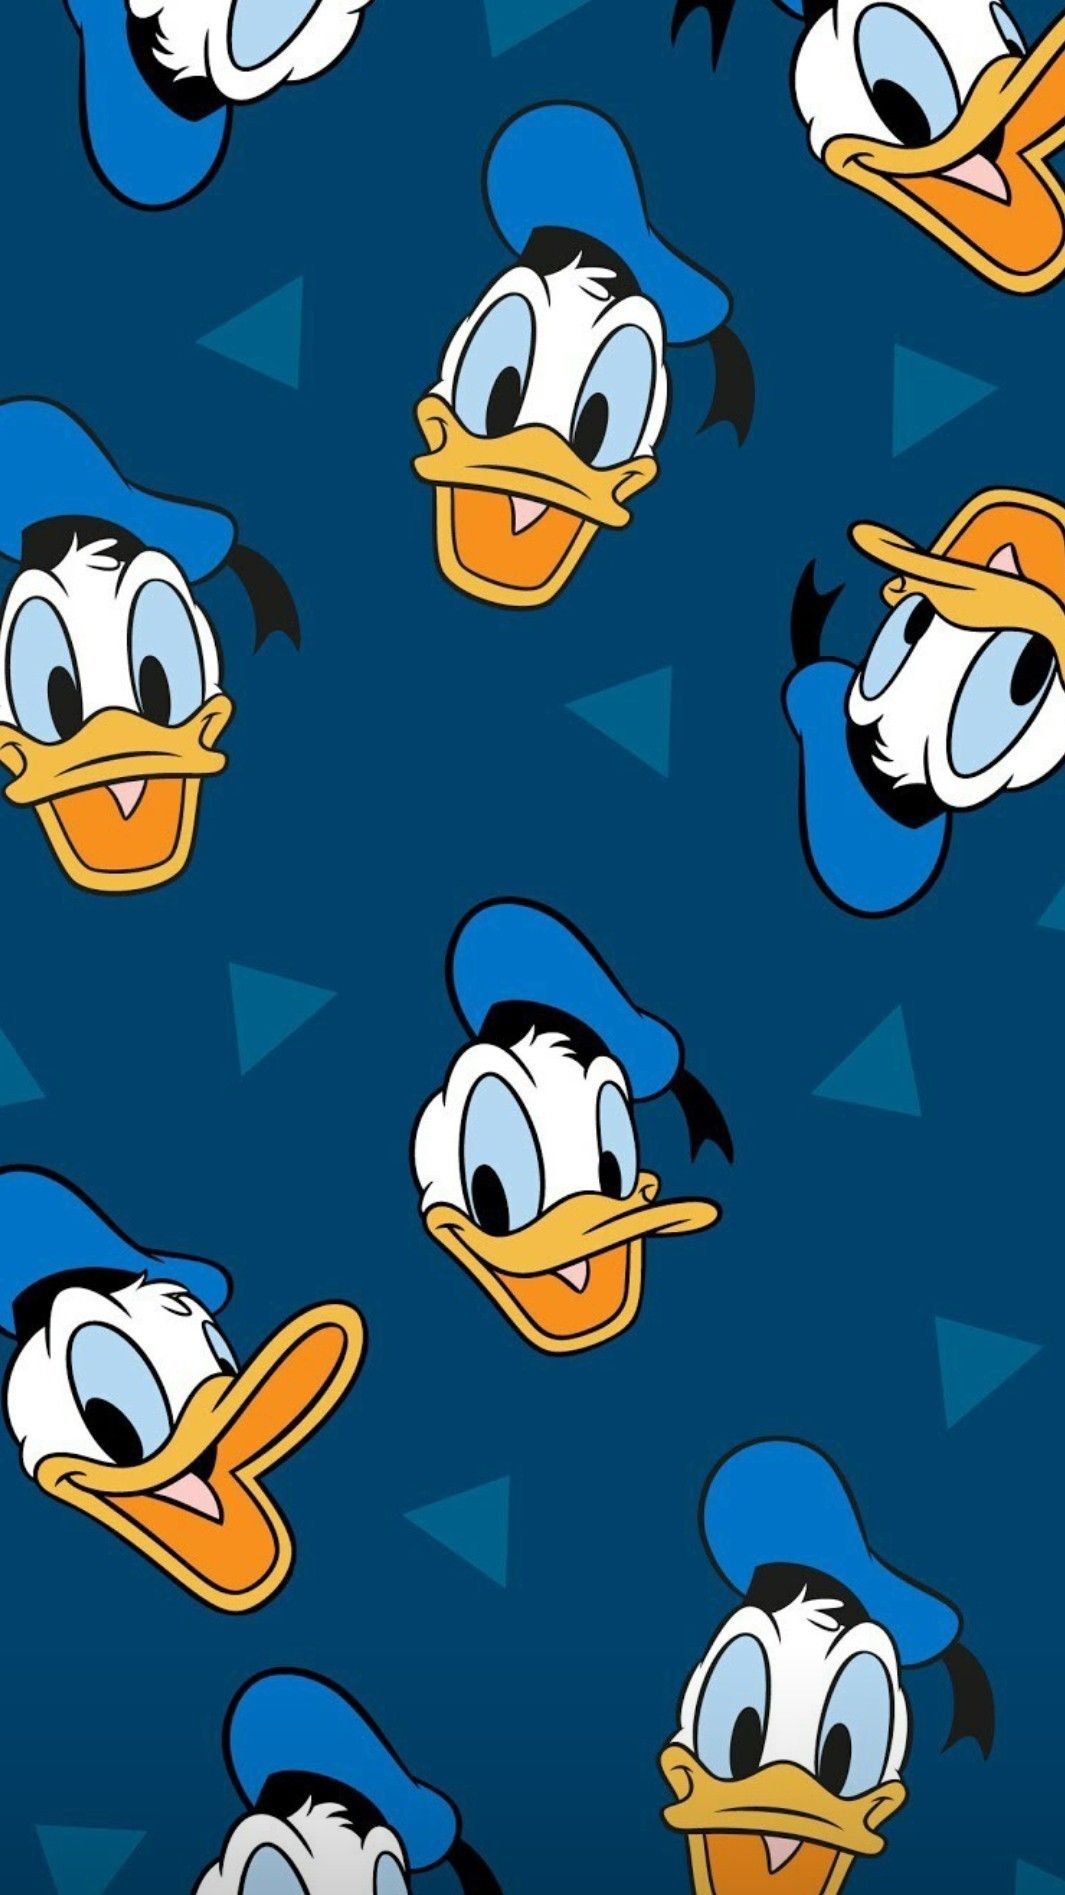 A pattern of donald duck and his friends - Duck